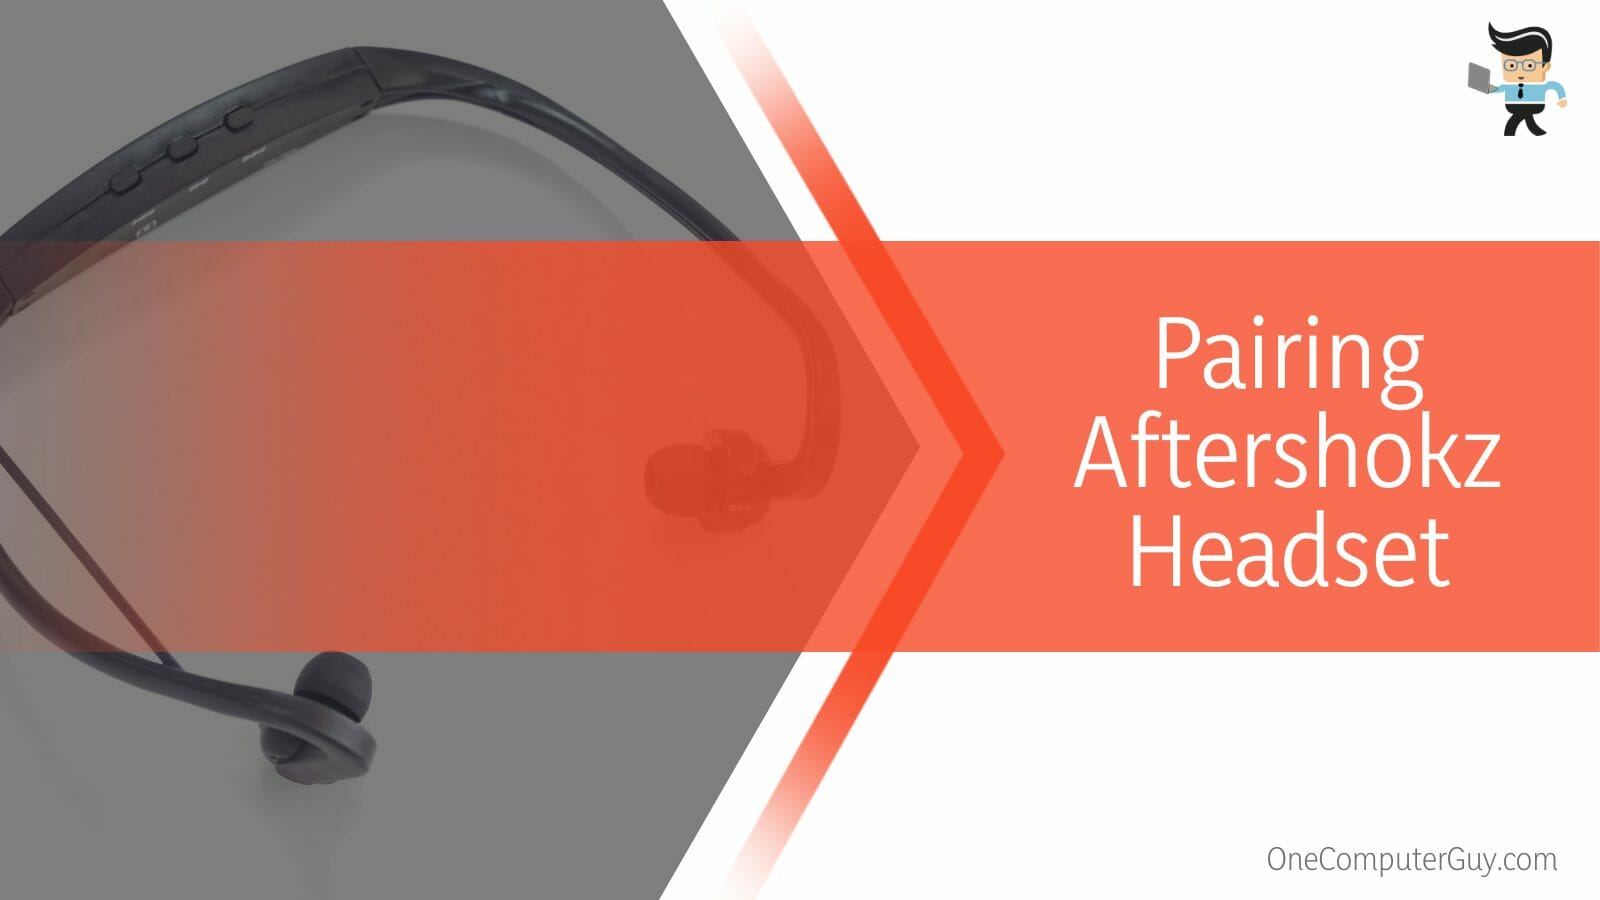 Pairing Aftershokz Headset to Android